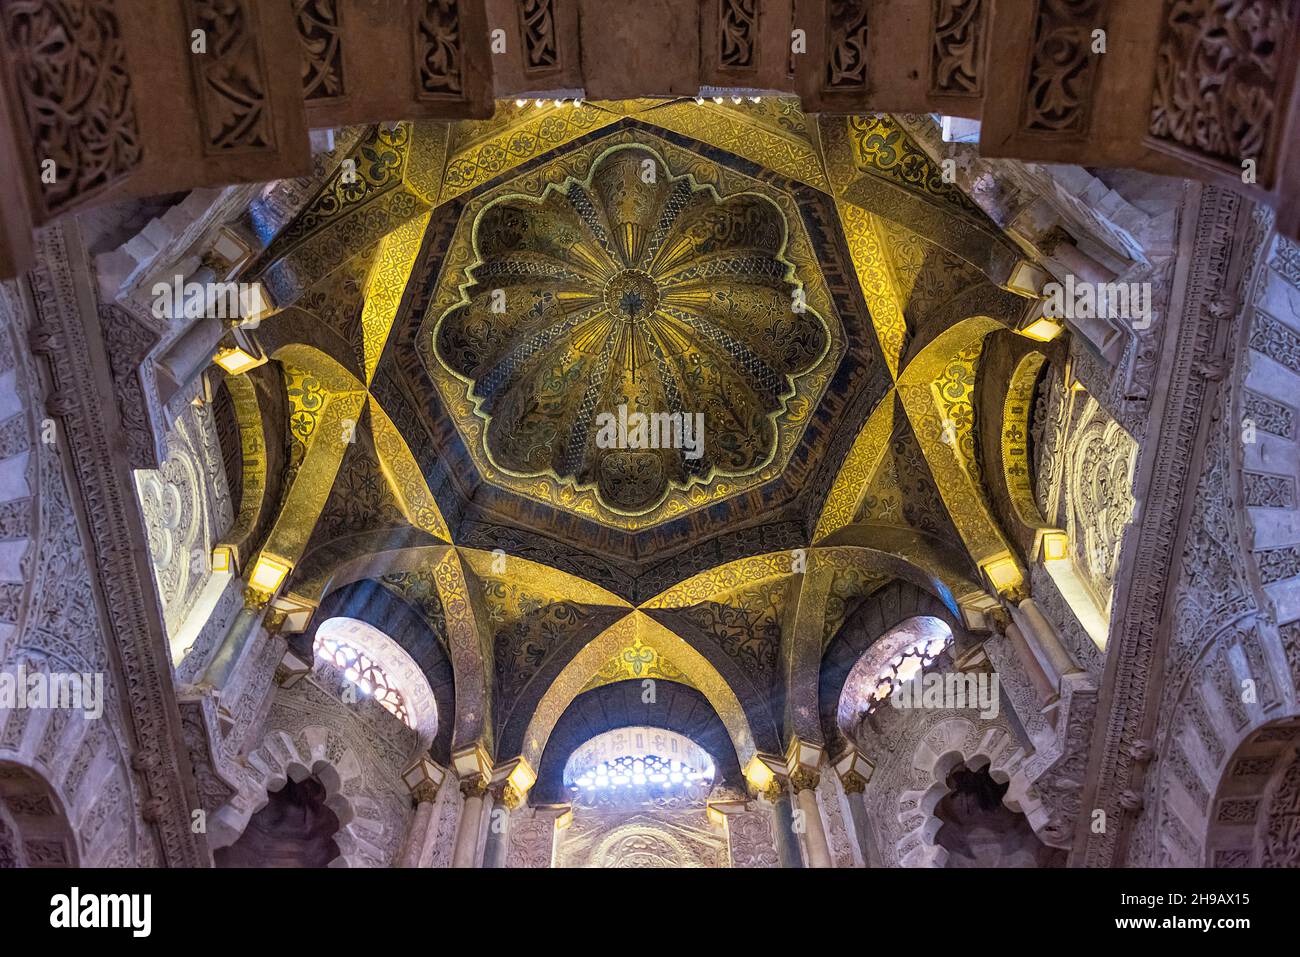 Ceiling inside Mezquita-Cathedral (Mosque-Cathedral or Great Mosque of Cordoba), Cordoba, Cordoba Province, Andalusia Autonomous Community, Spain Stock Photo